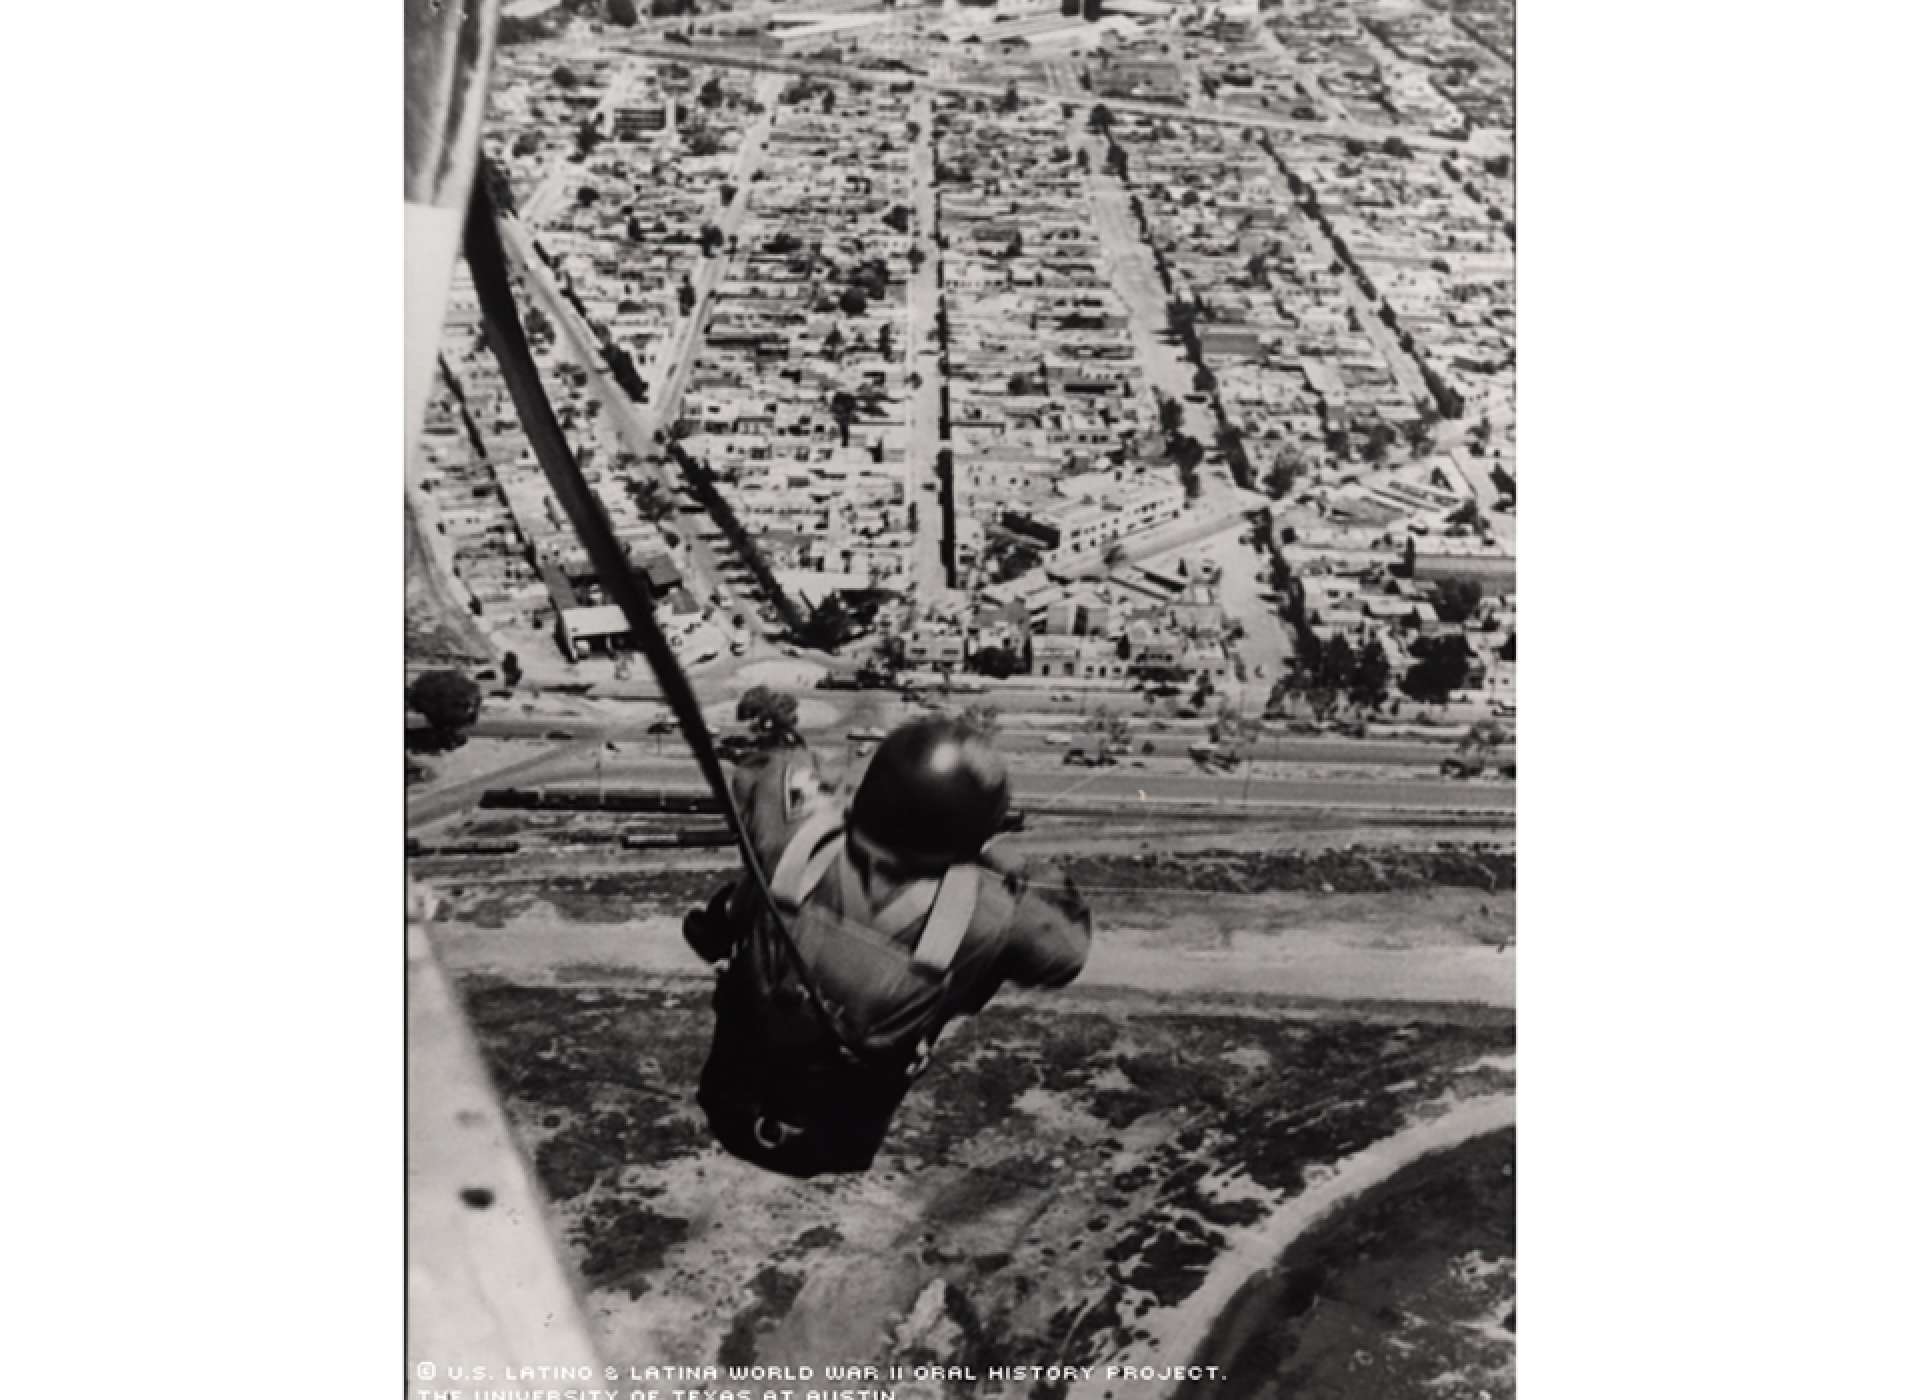 Lt. Ed Peniche jumps over Balbuena Air Force base at the outskirts of Mexico City in April 1950